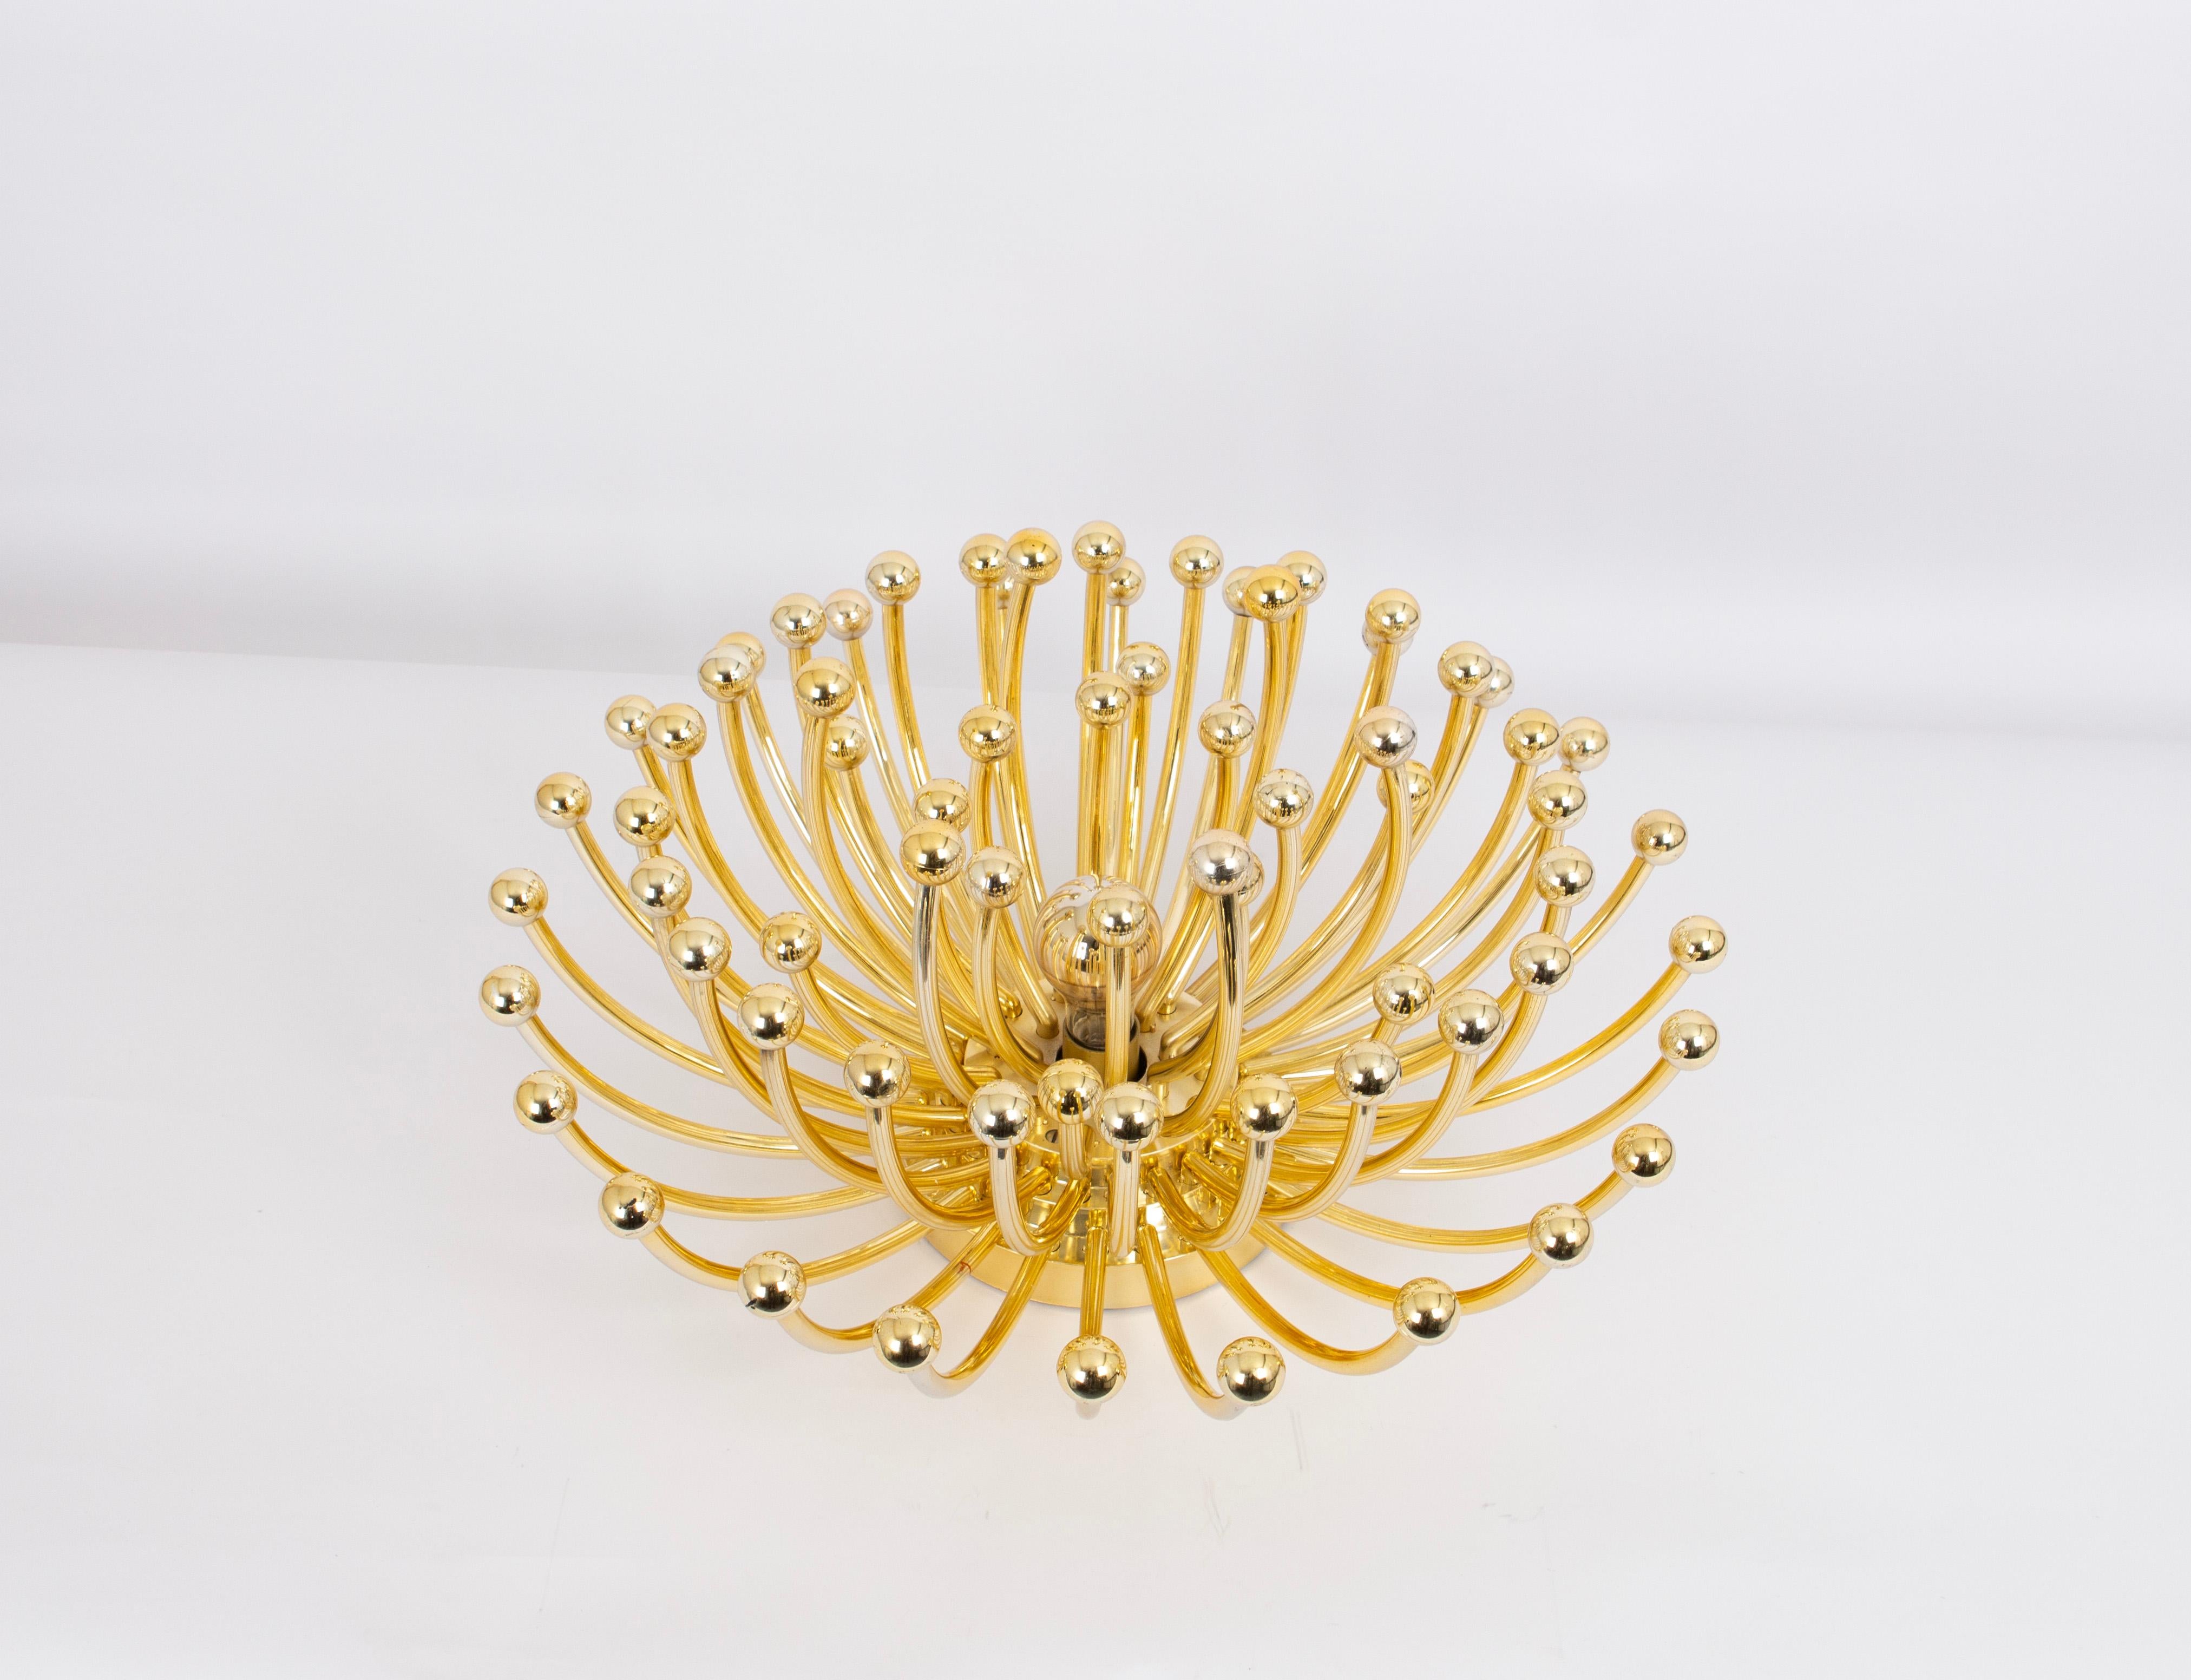 Large Pistillino Ceiling Light by Valenti Luce for Studio Tetrarch, 1970s For Sale 2